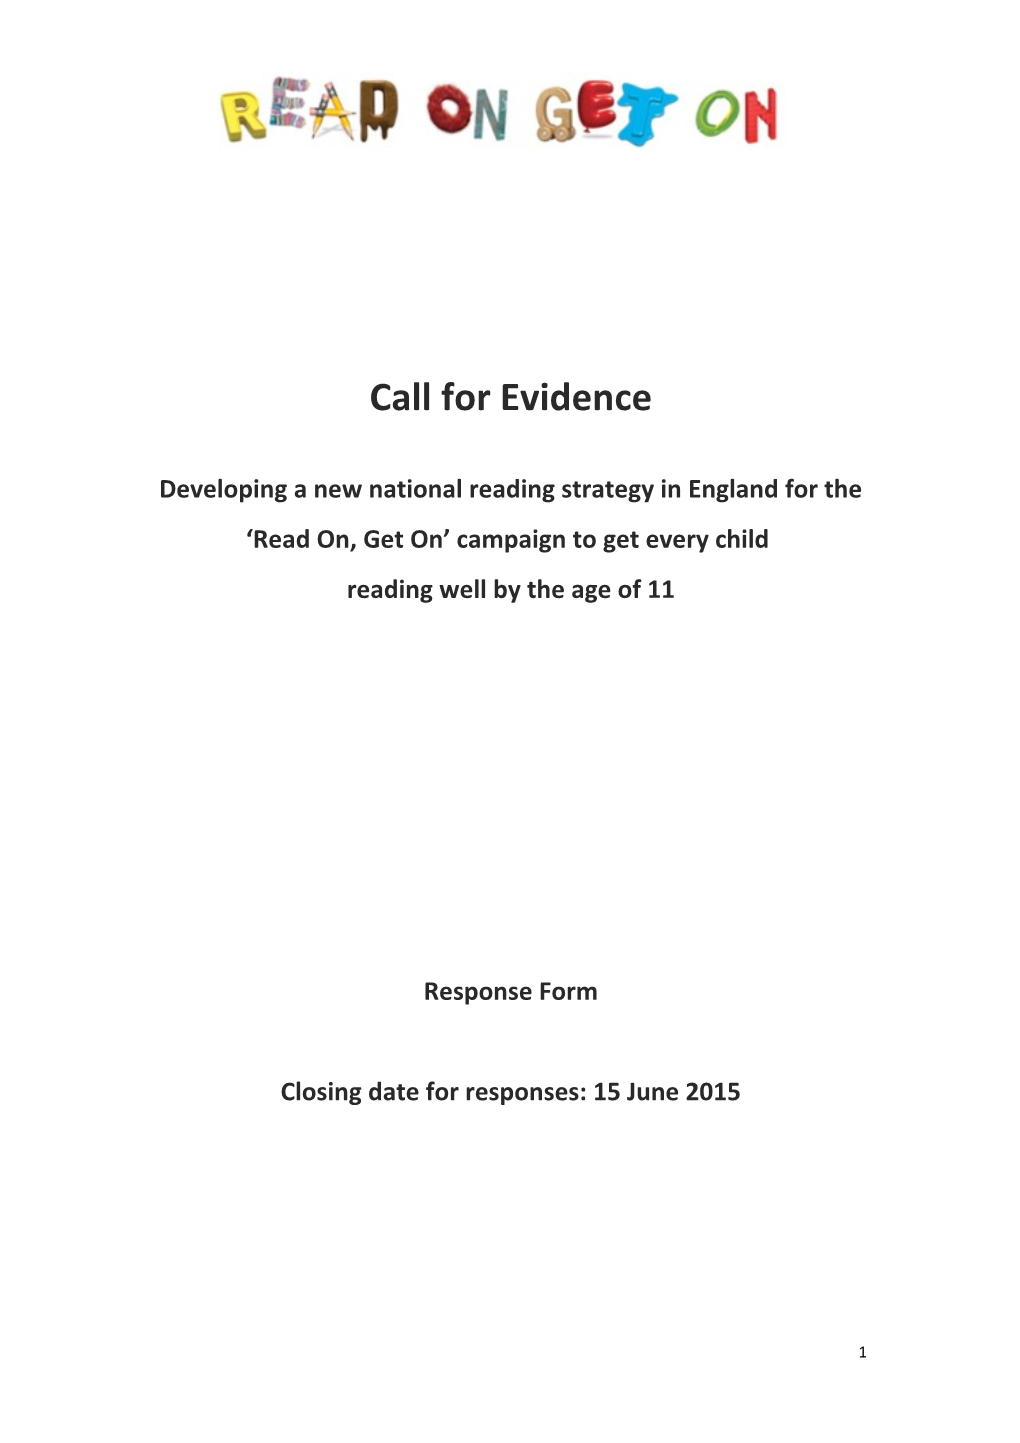 Call for Evidence